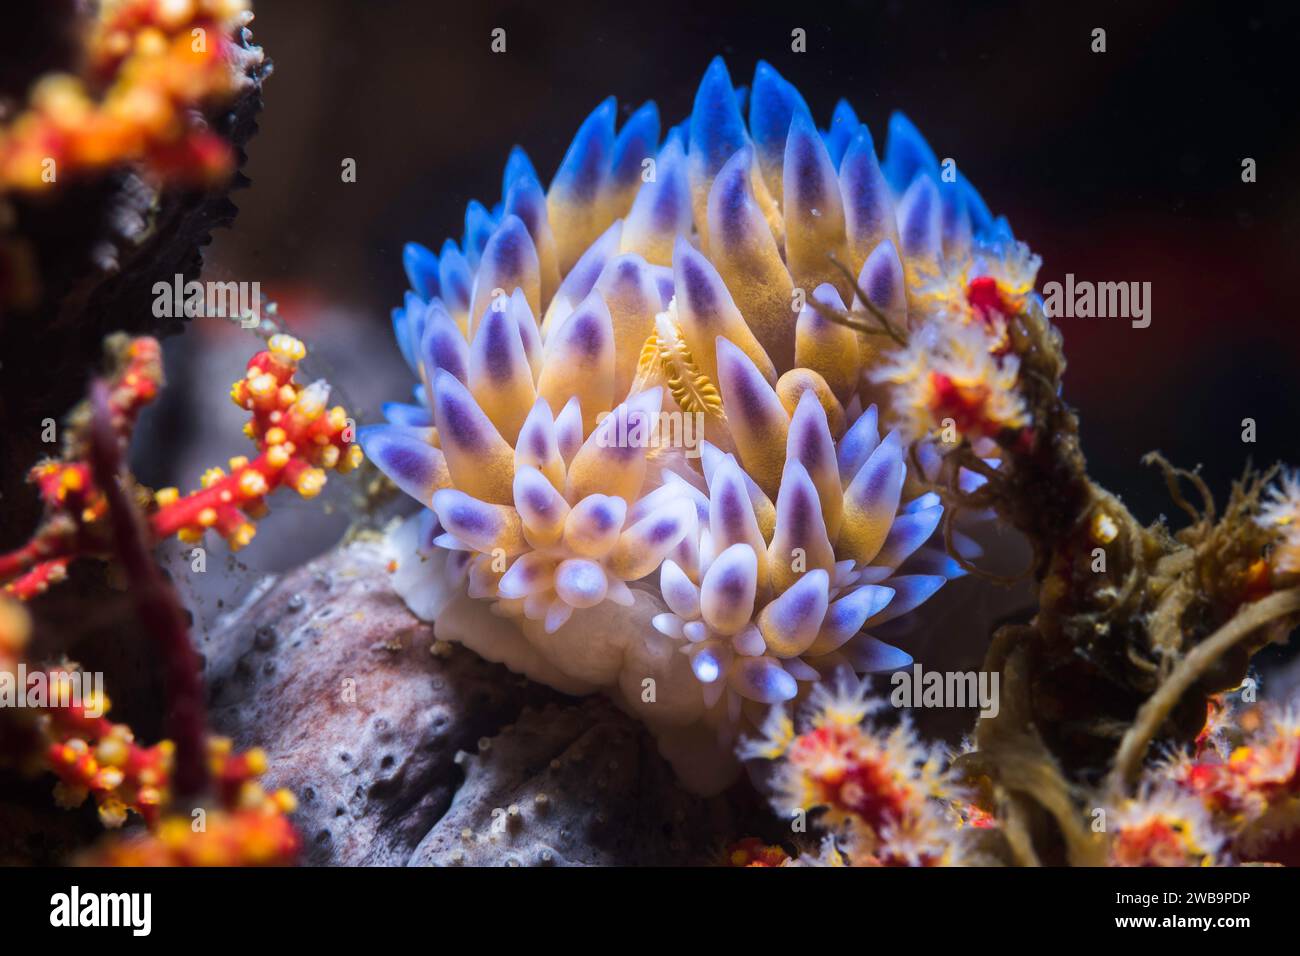 A blue Gas flame nudibranch (Bonisa nakaza) front view of the sea slug on the reef underwater Stock Photo